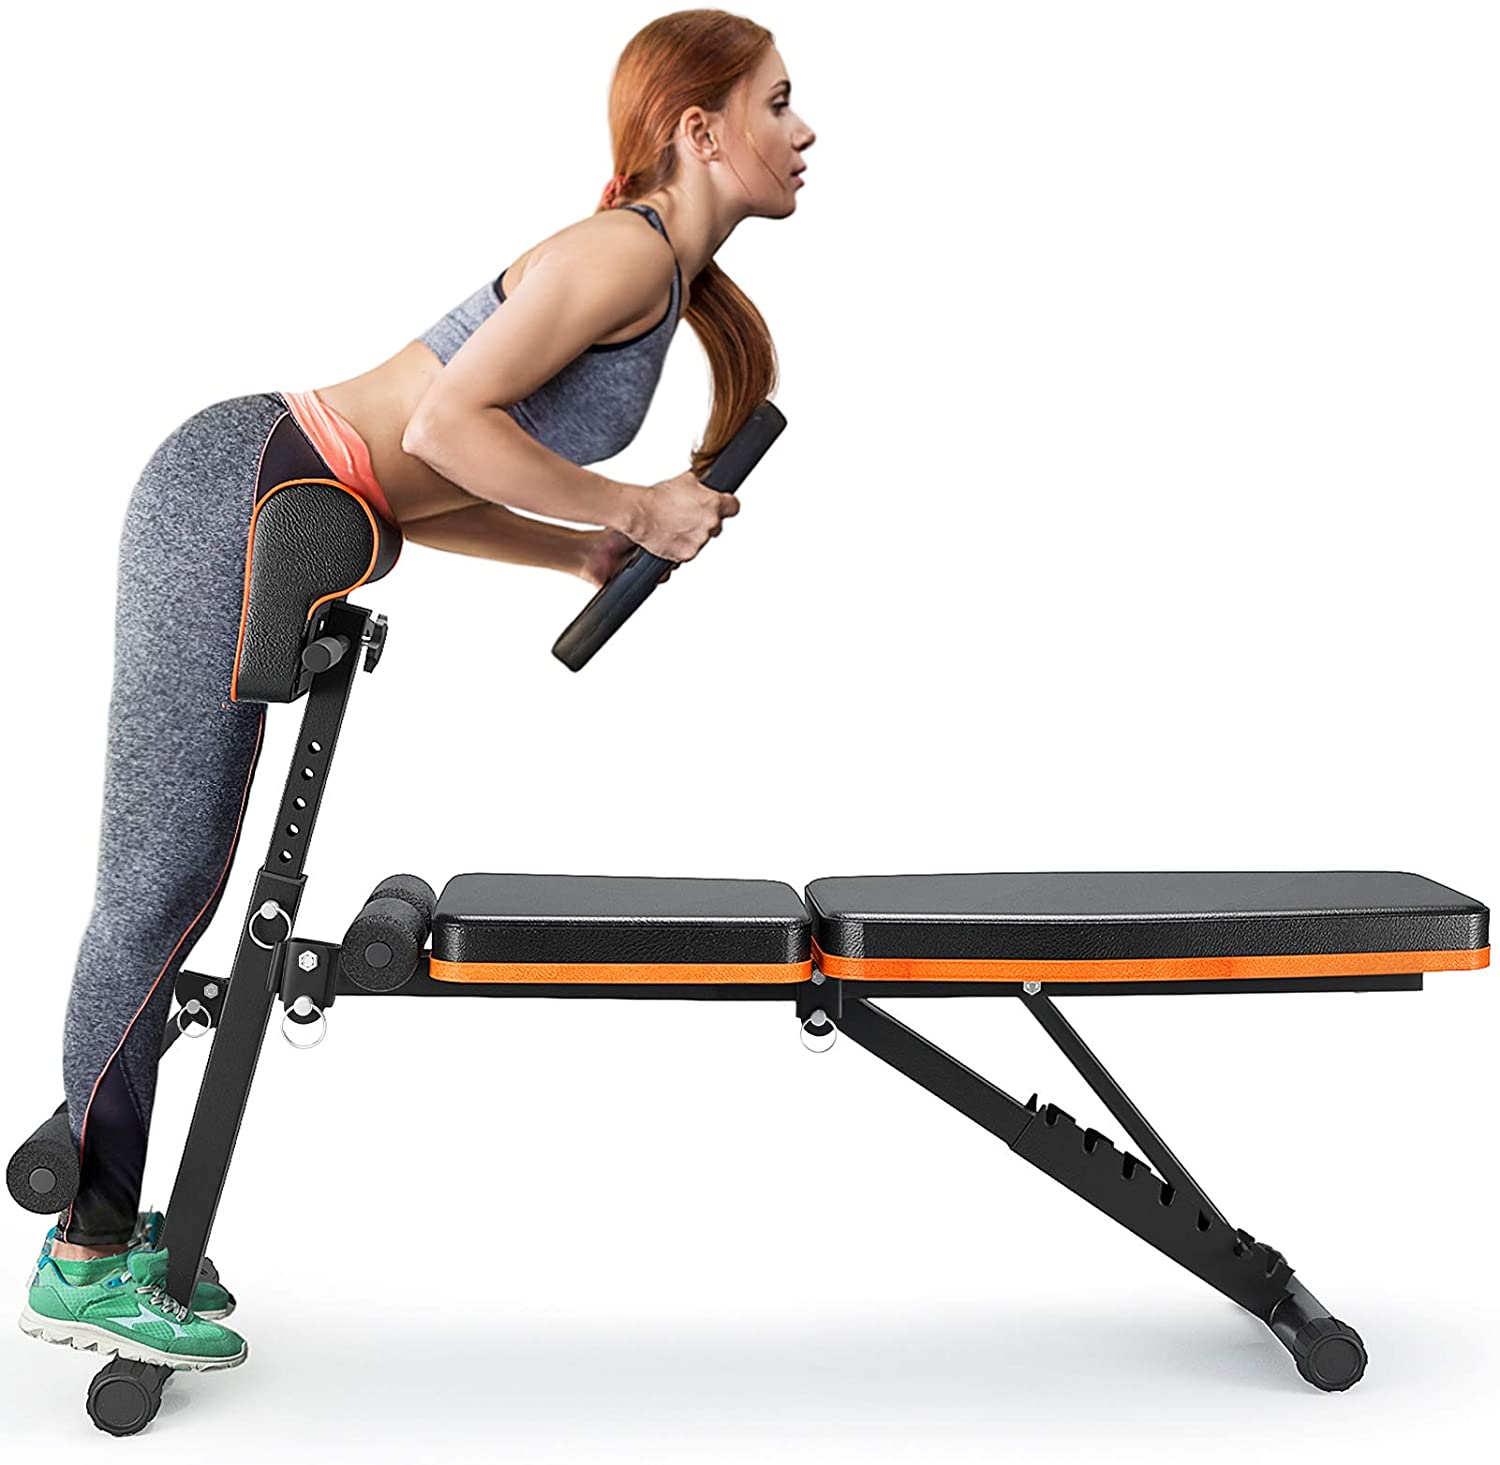 PERLECARE Foldable Cushioned Multipurpose Preacher Curl Bench For Arm Workouts